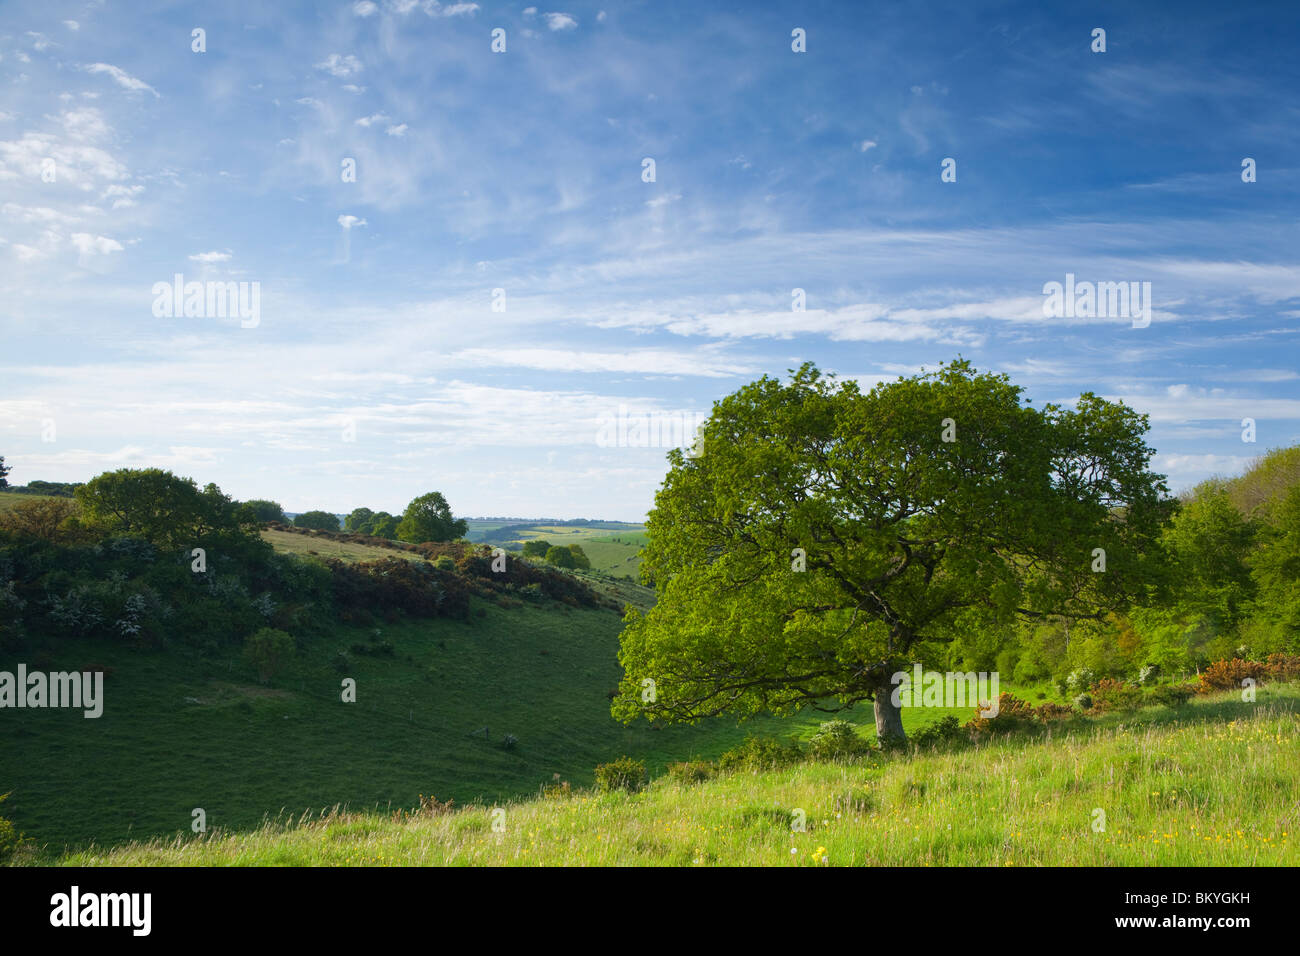 A photograph of a tree in the landscape with blue sky and fair weather cloud above the English countryside in summer Stock Photo